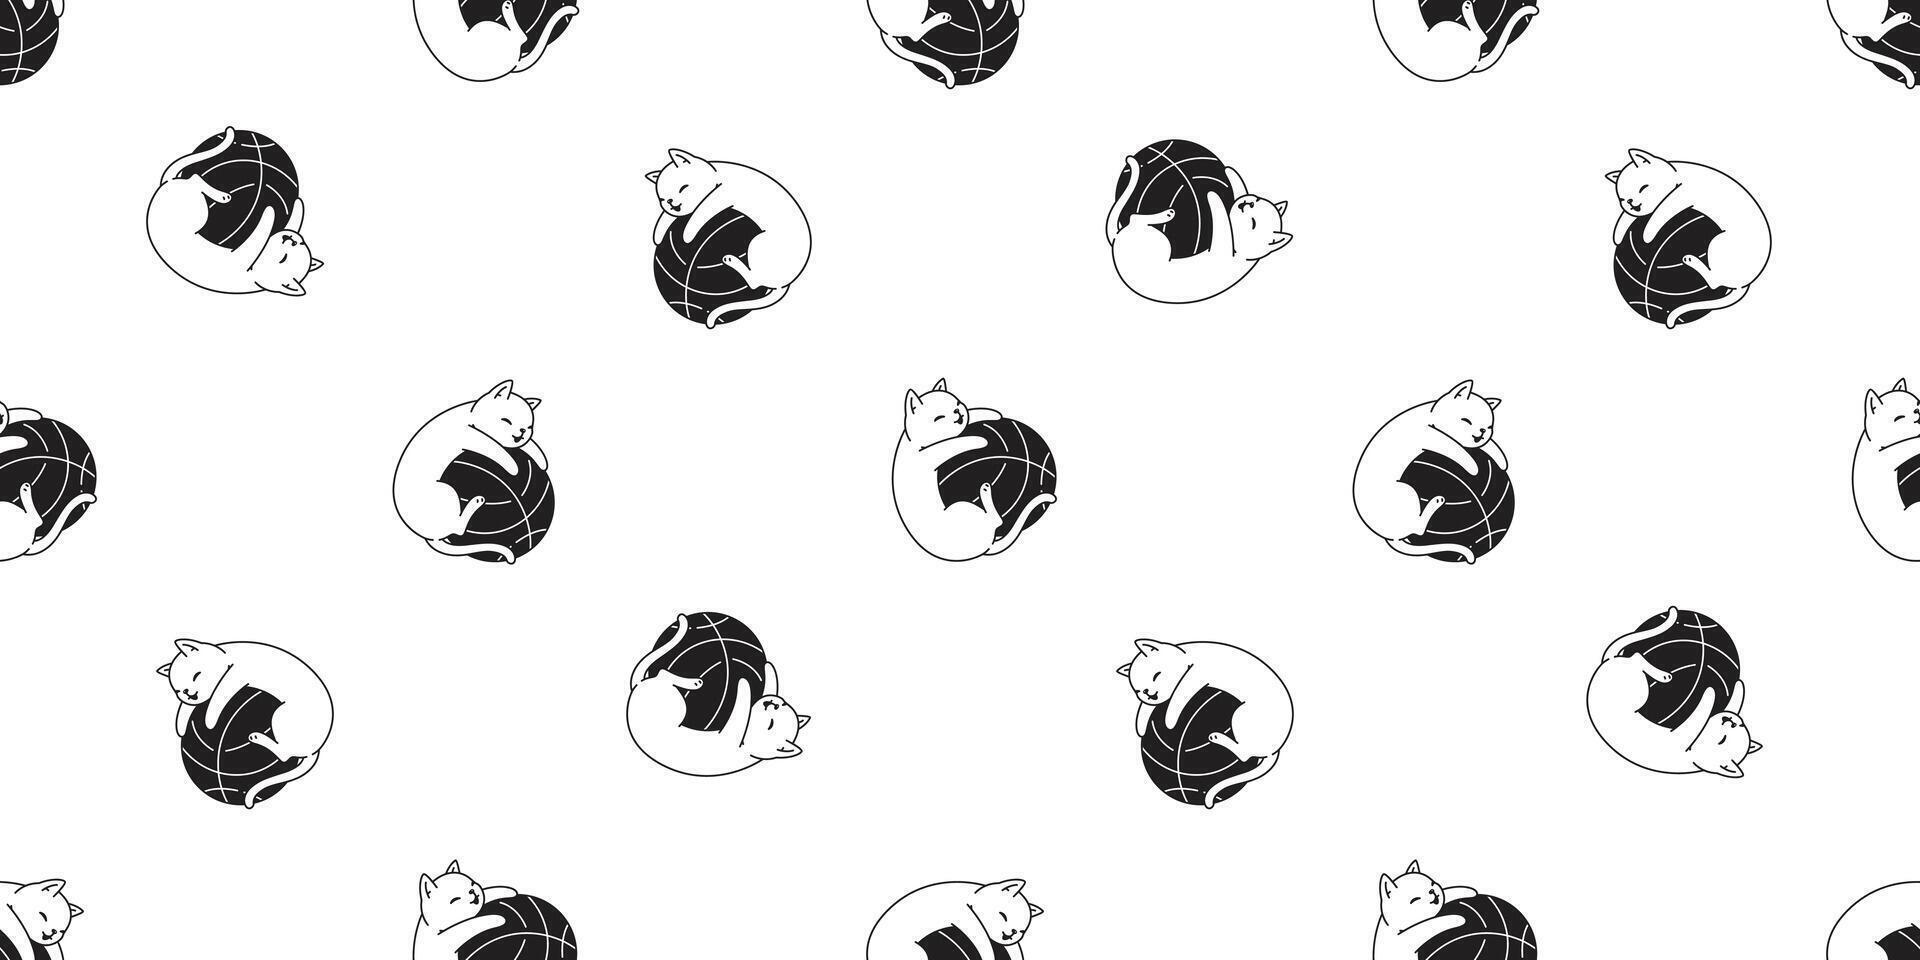 cat seamless pattern basketball kitten calico pet sport scarf isolated repeat background cartoon animal tile wallpaper illustration doodle white design vector